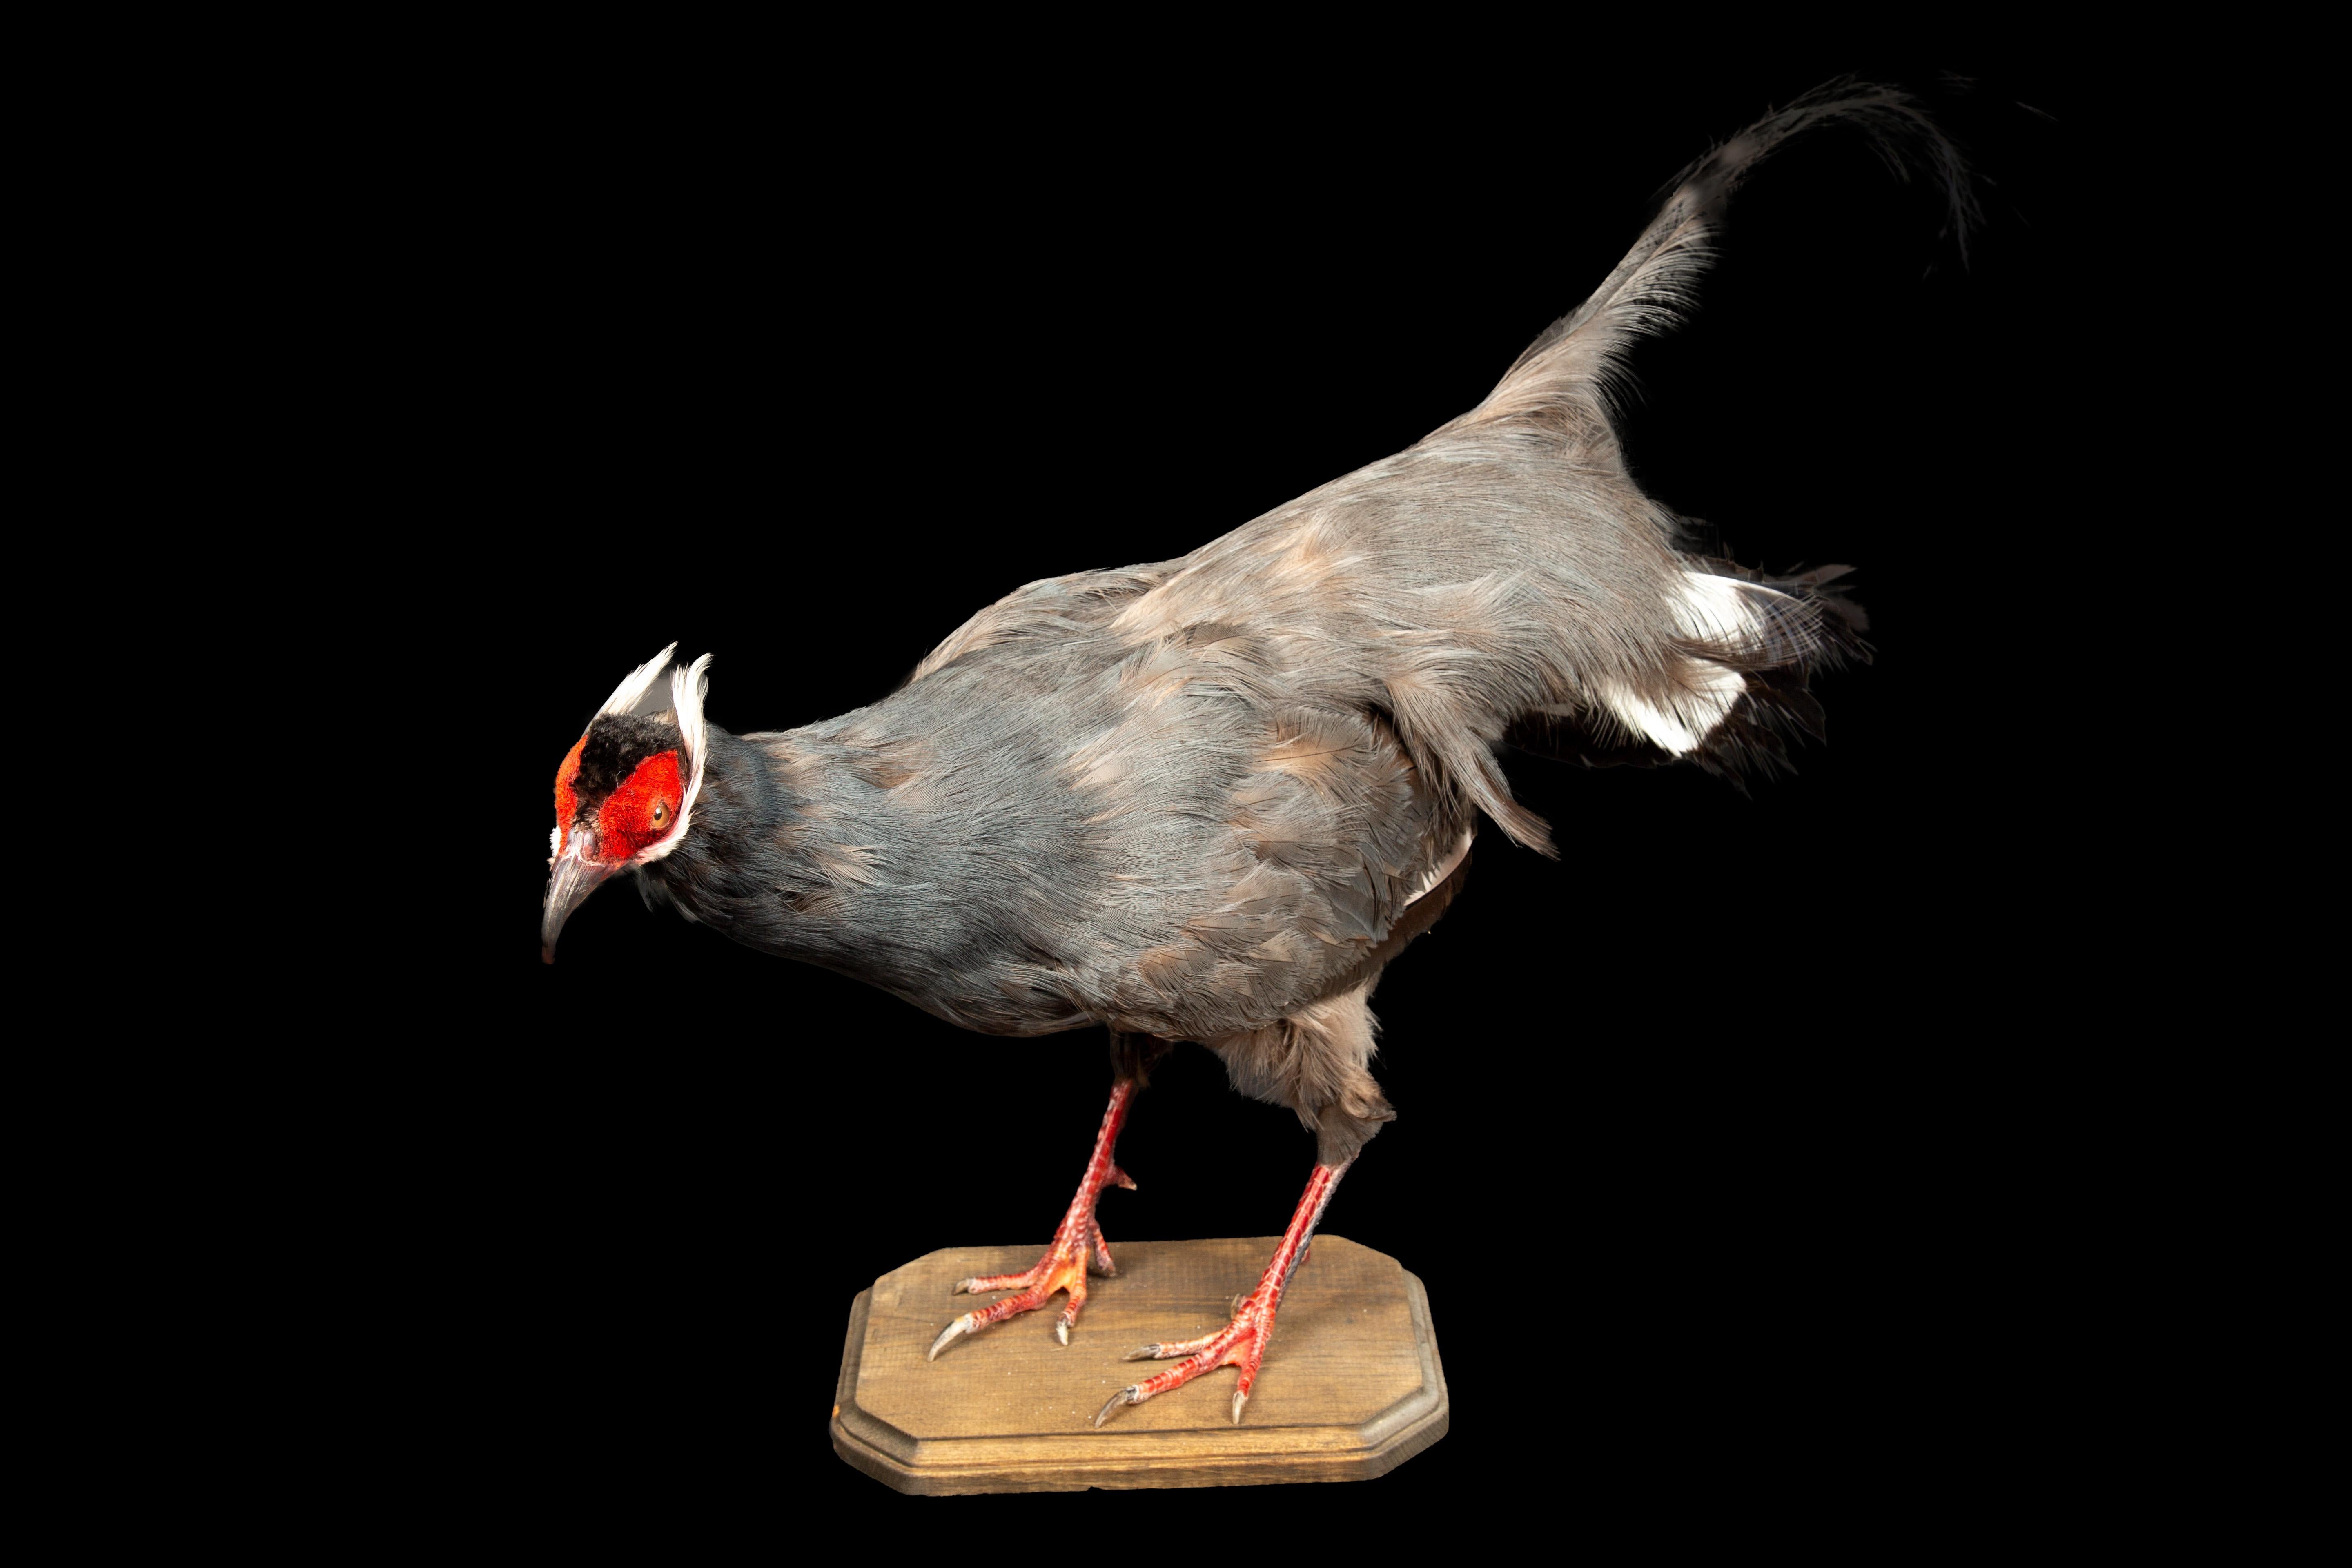 This taxidermy specimen of the Blue Eared Pheasant presents a striking representation of this impressive avian species. This sizeable terrestrial bird boasts a stately gray plumage, complemented by an ornate, frilly tail that adds to its regal